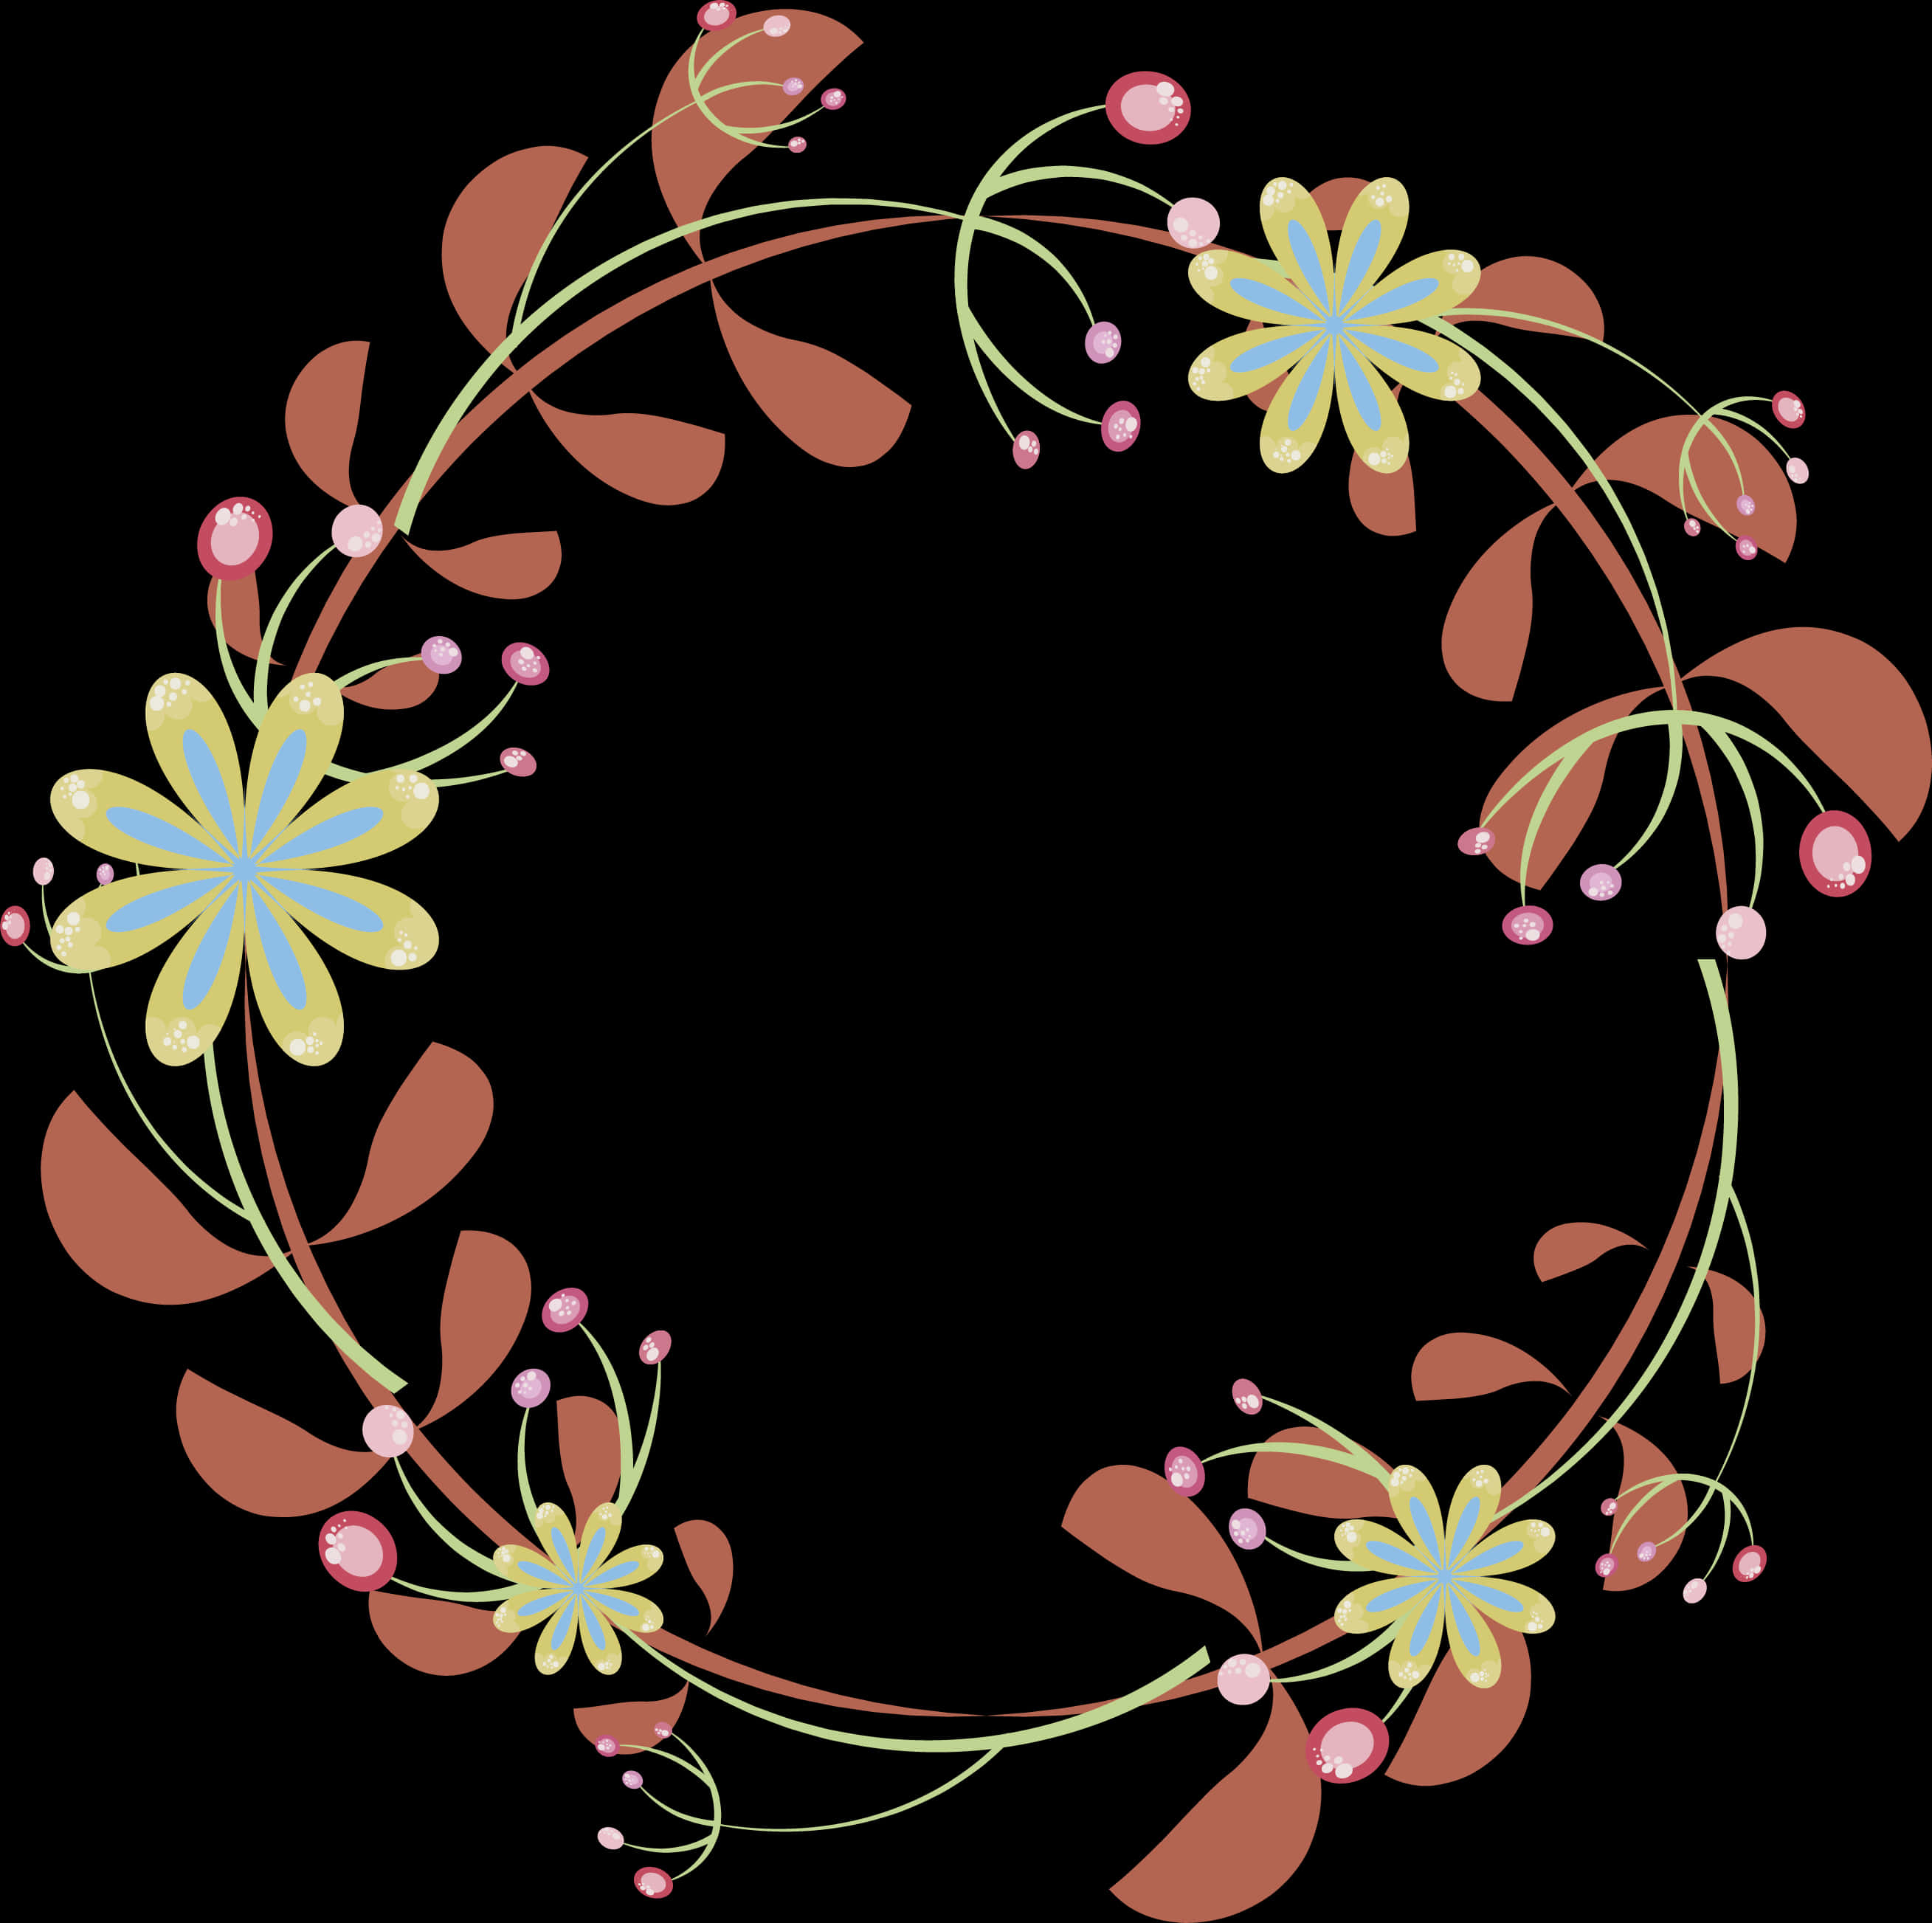 A Circular Floral Wreath With Flowers And Leaves